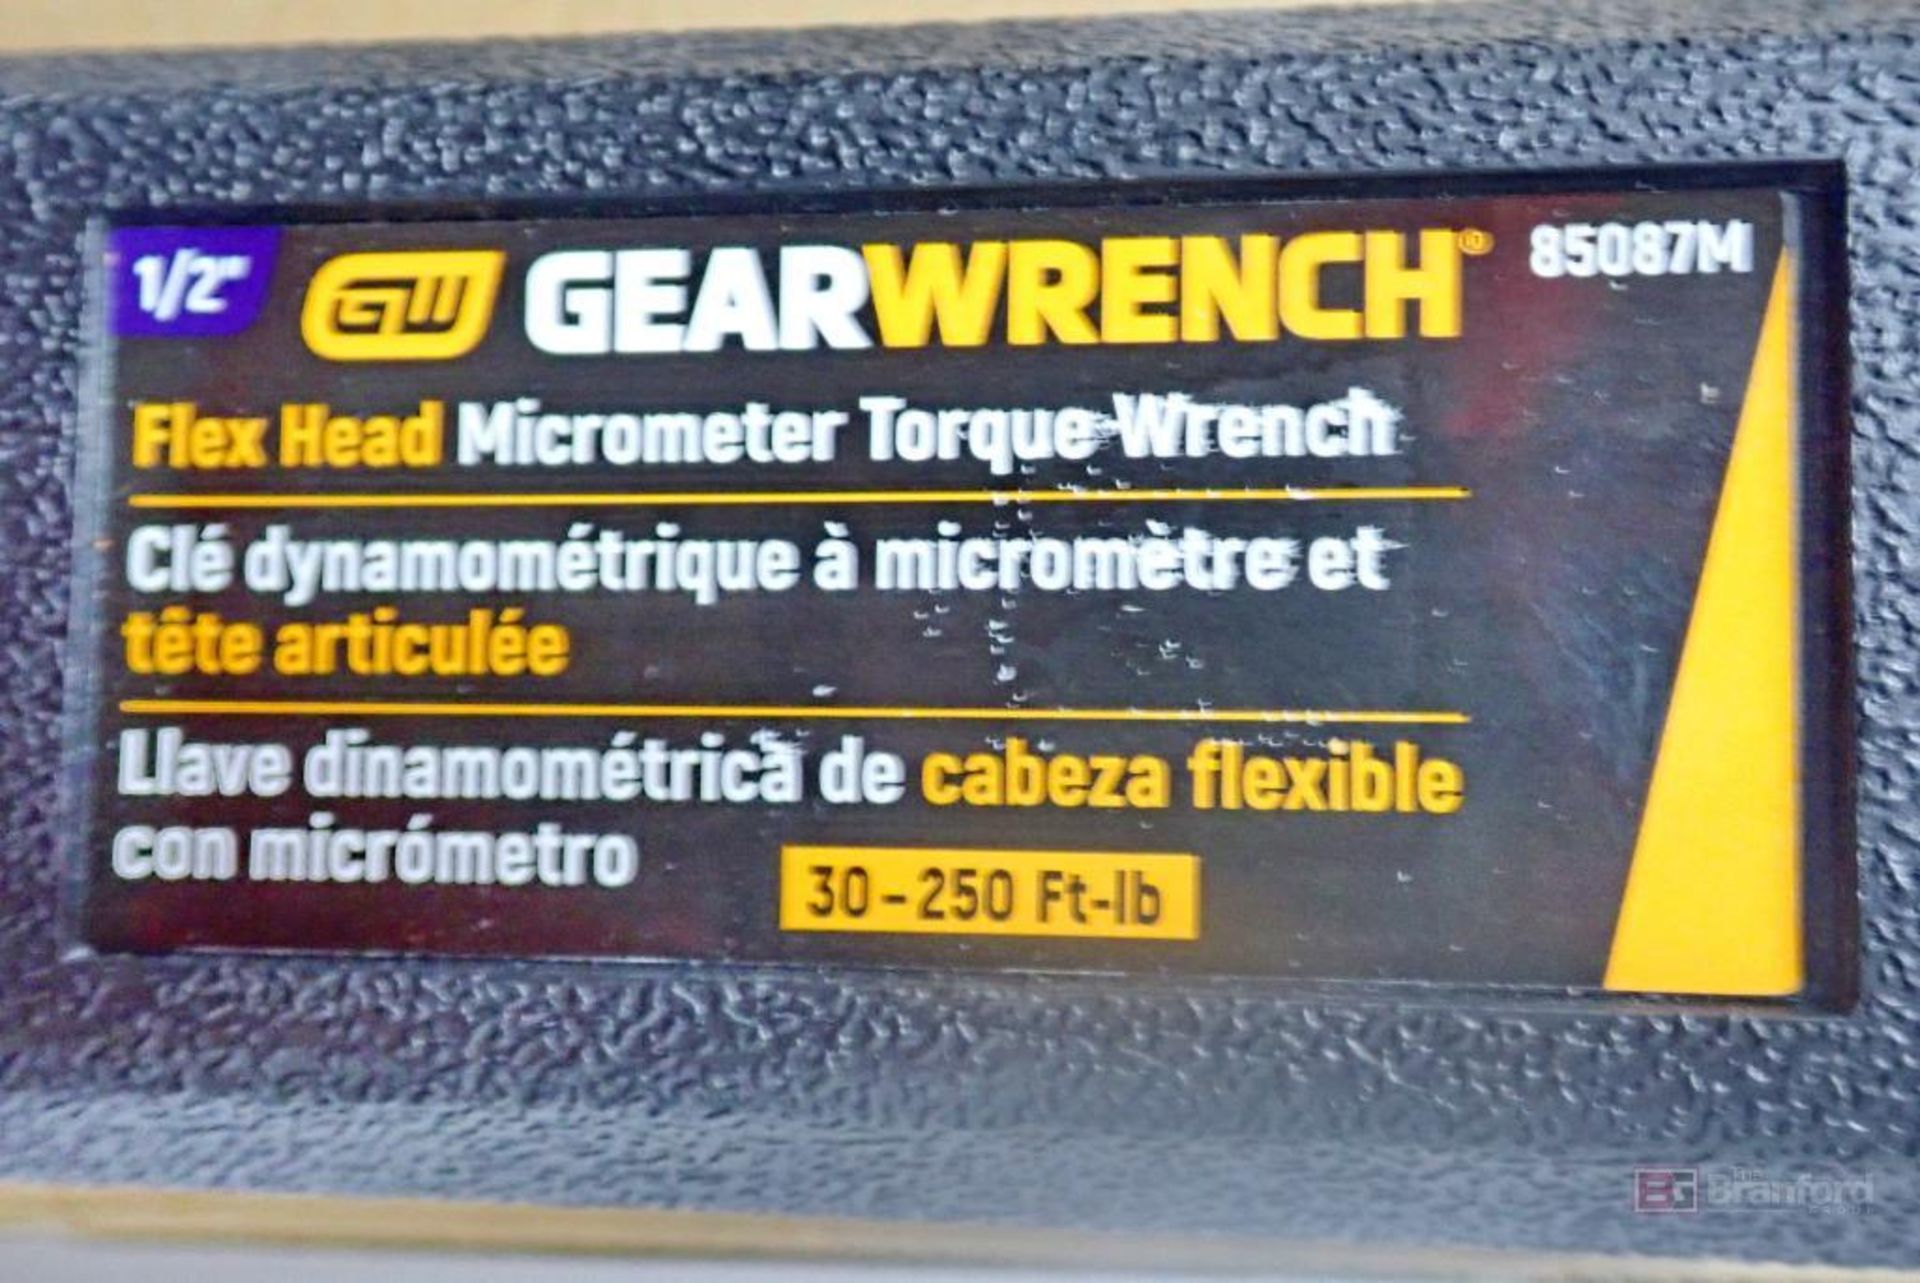 GearWrench 85087M (8612115) 1/2" Drive Flex Head Micrometer Torque Wrench - Image 2 of 4